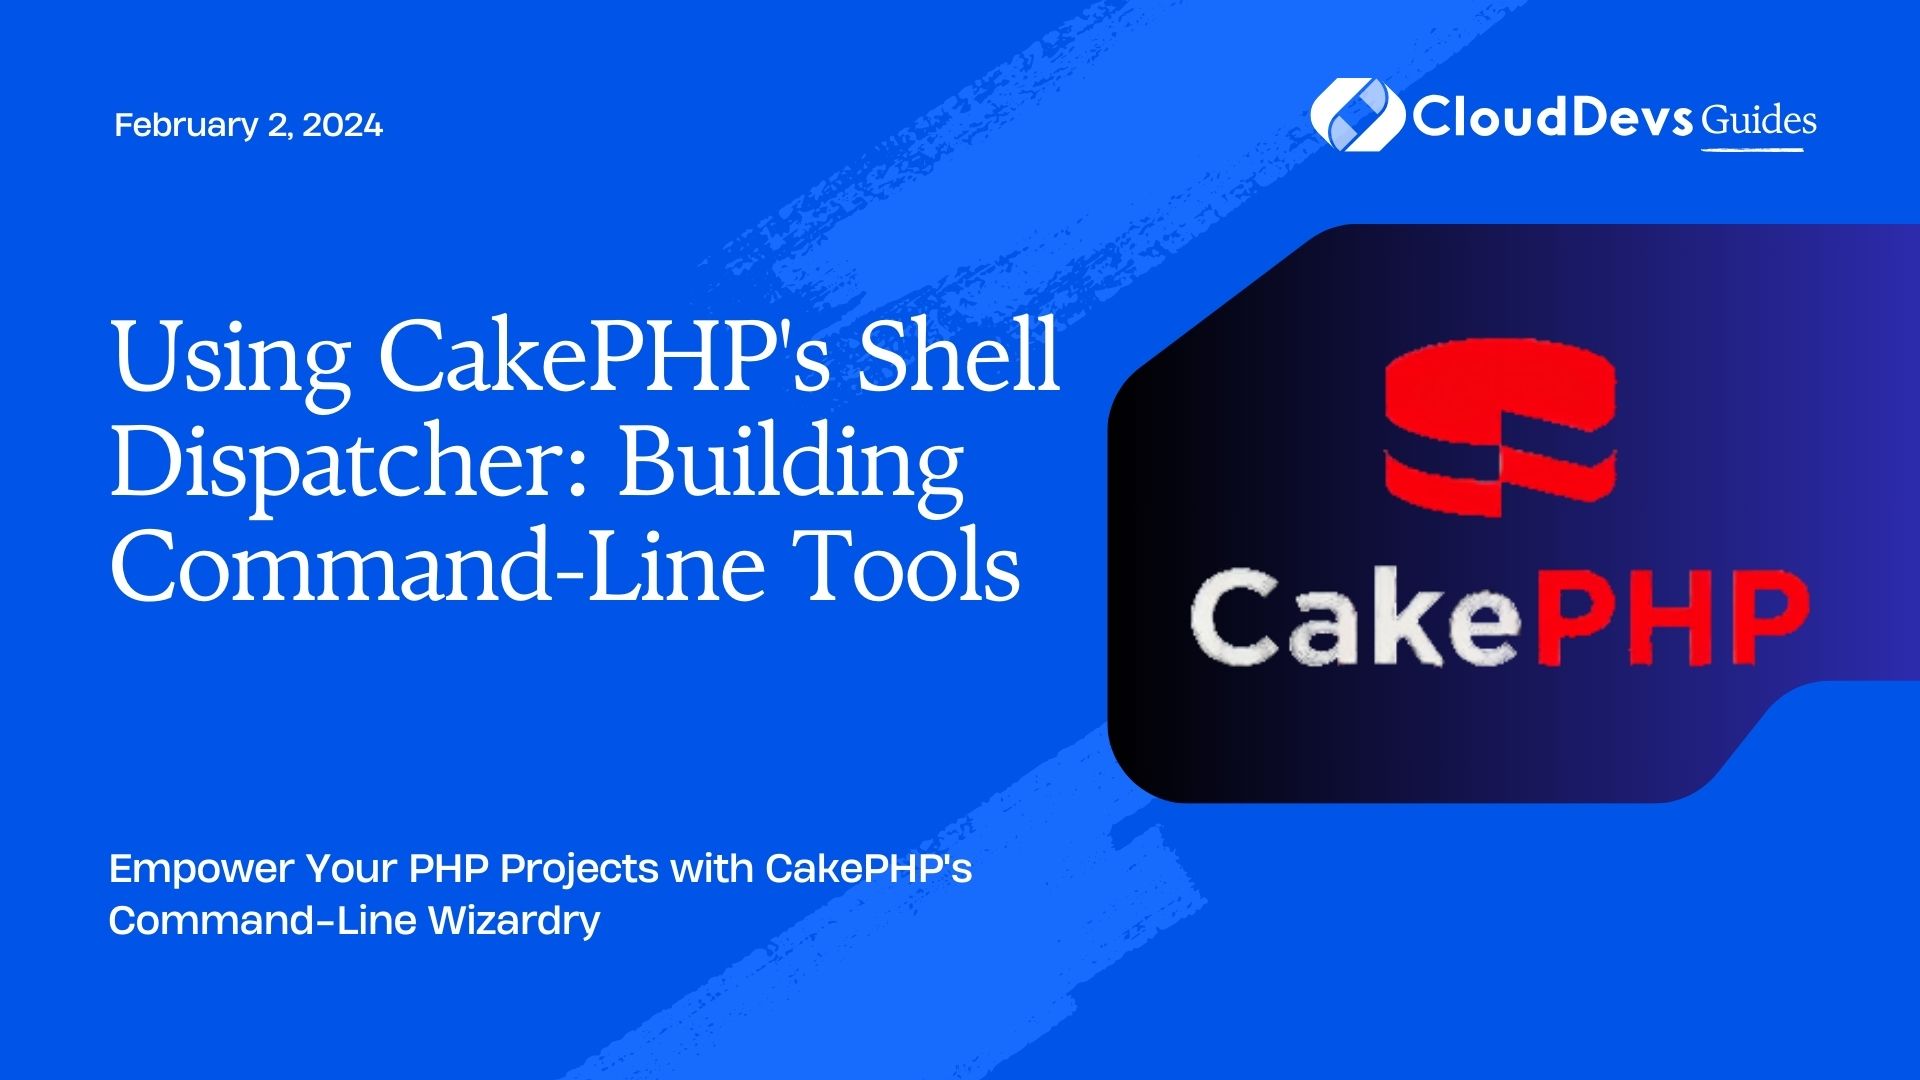 Using CakePHP's Shell Dispatcher: Building Command-Line Tools